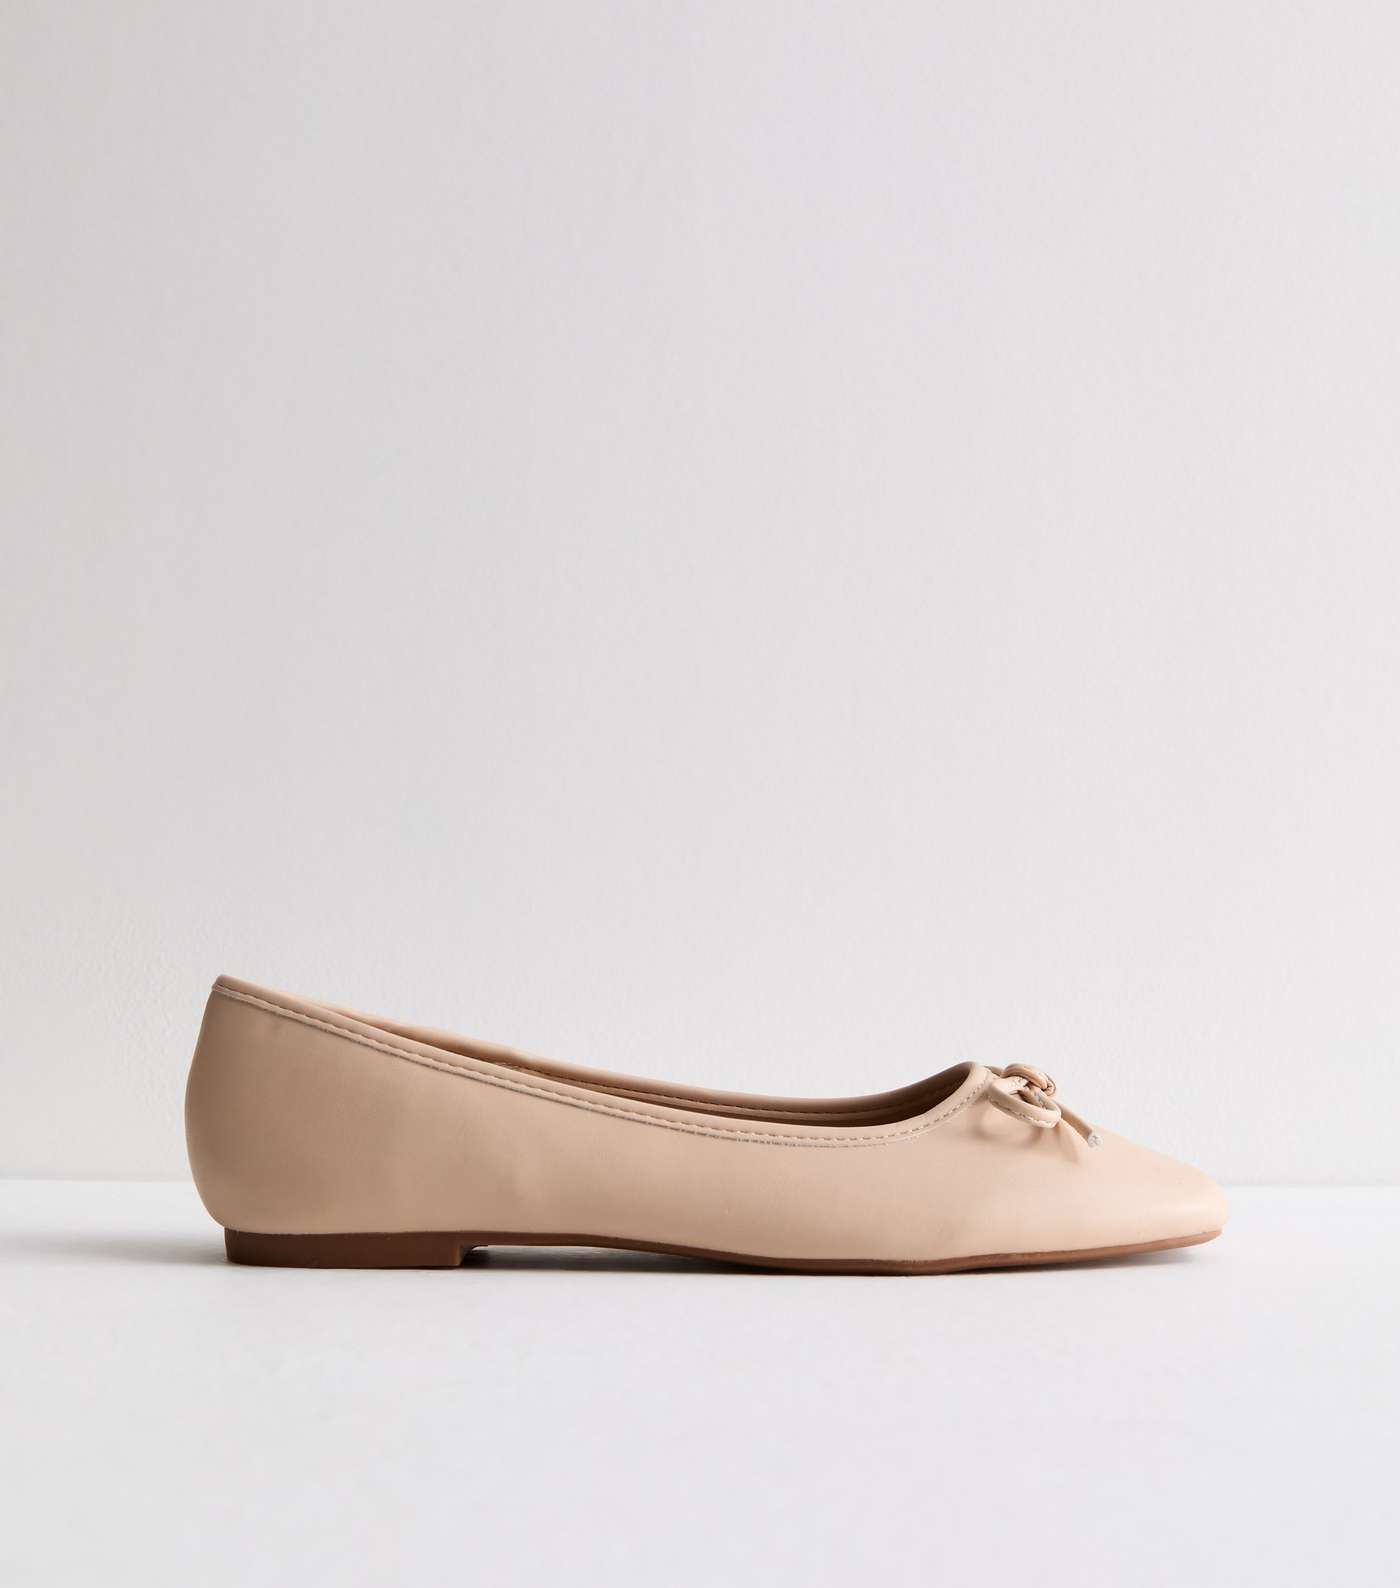 Truffle Pale Pink Leather-Look Bow Ballerina Pumps Image 5